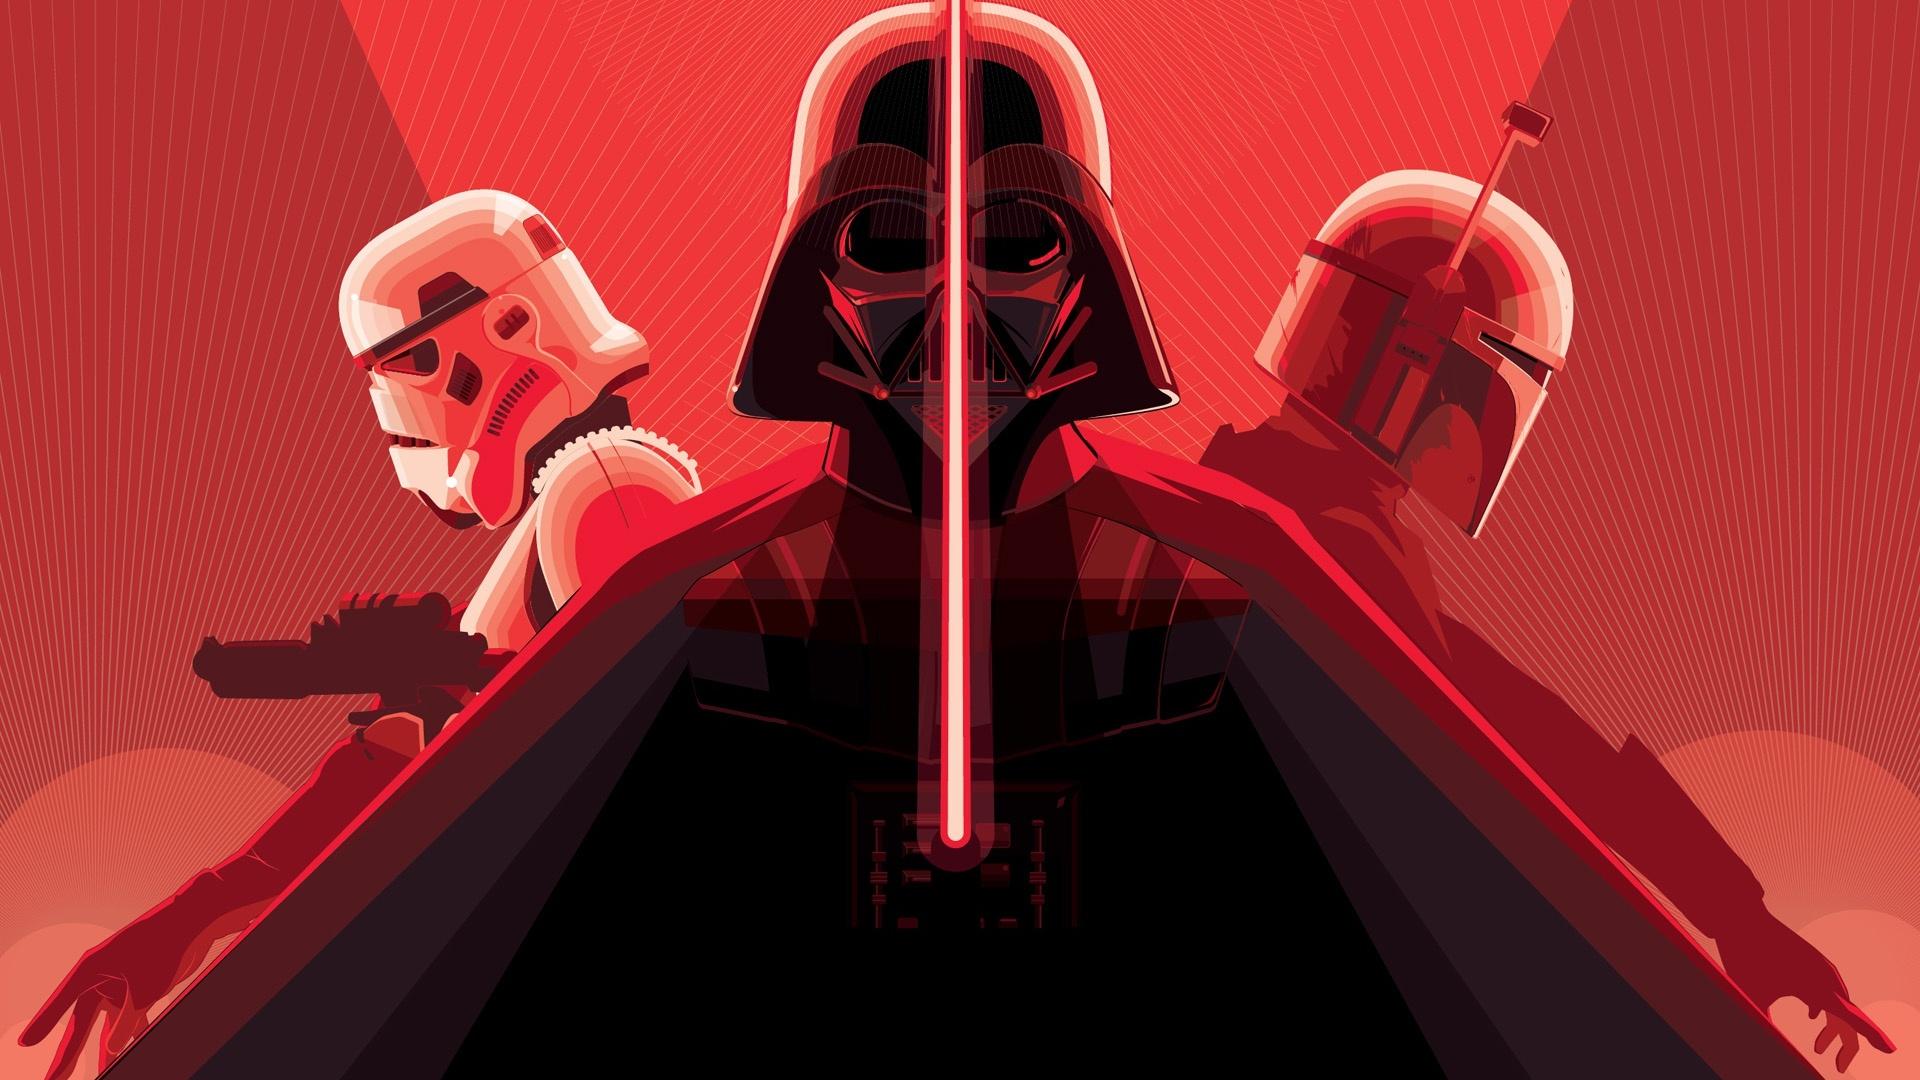 Darth Vader Star Wars Wallpaper and Themes for New Tab Page